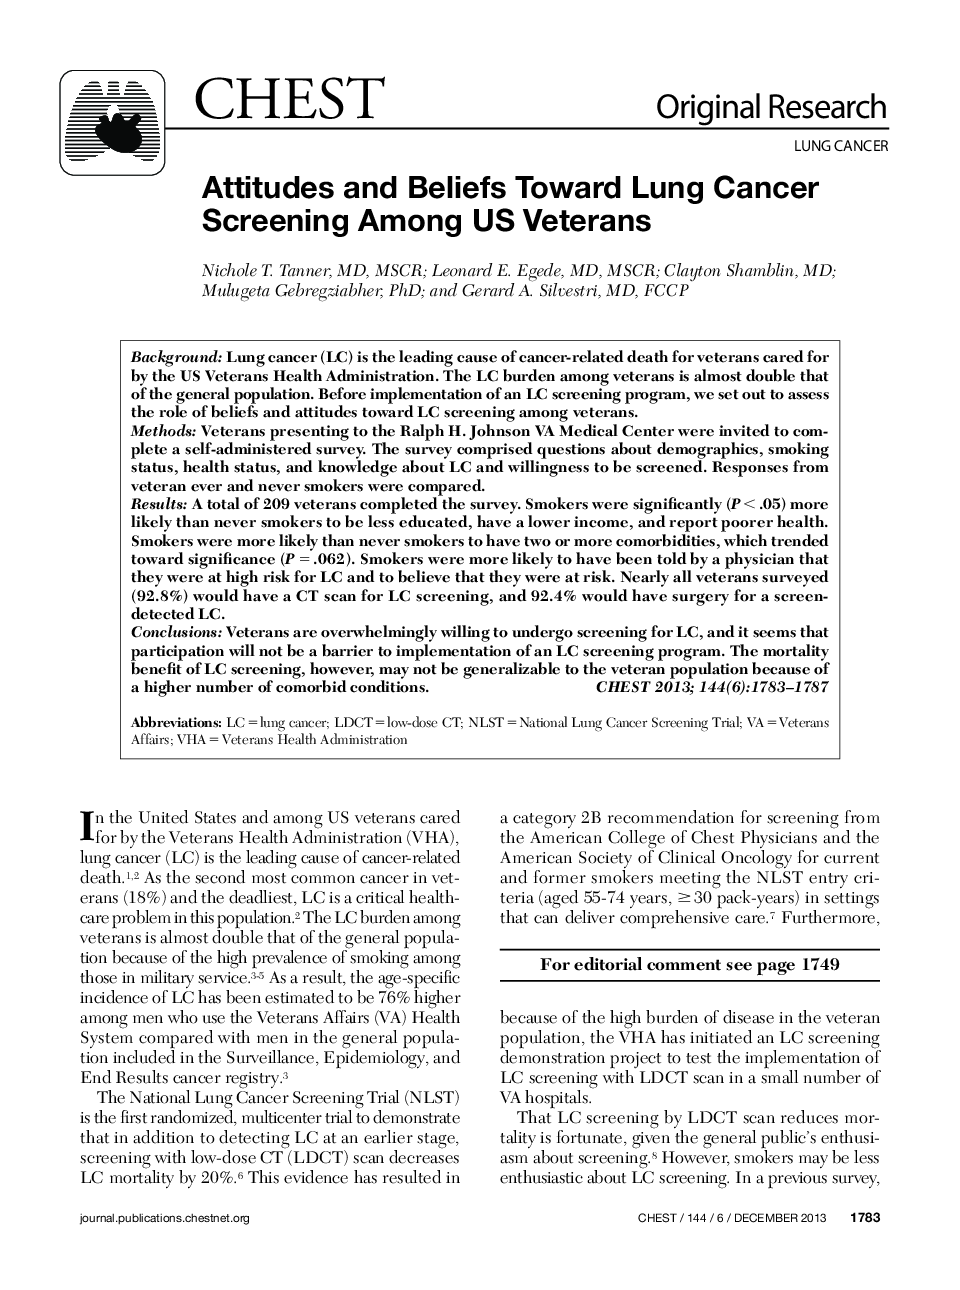 Attitudes and Beliefs Toward Lung Cancer Screening Among US Veterans 